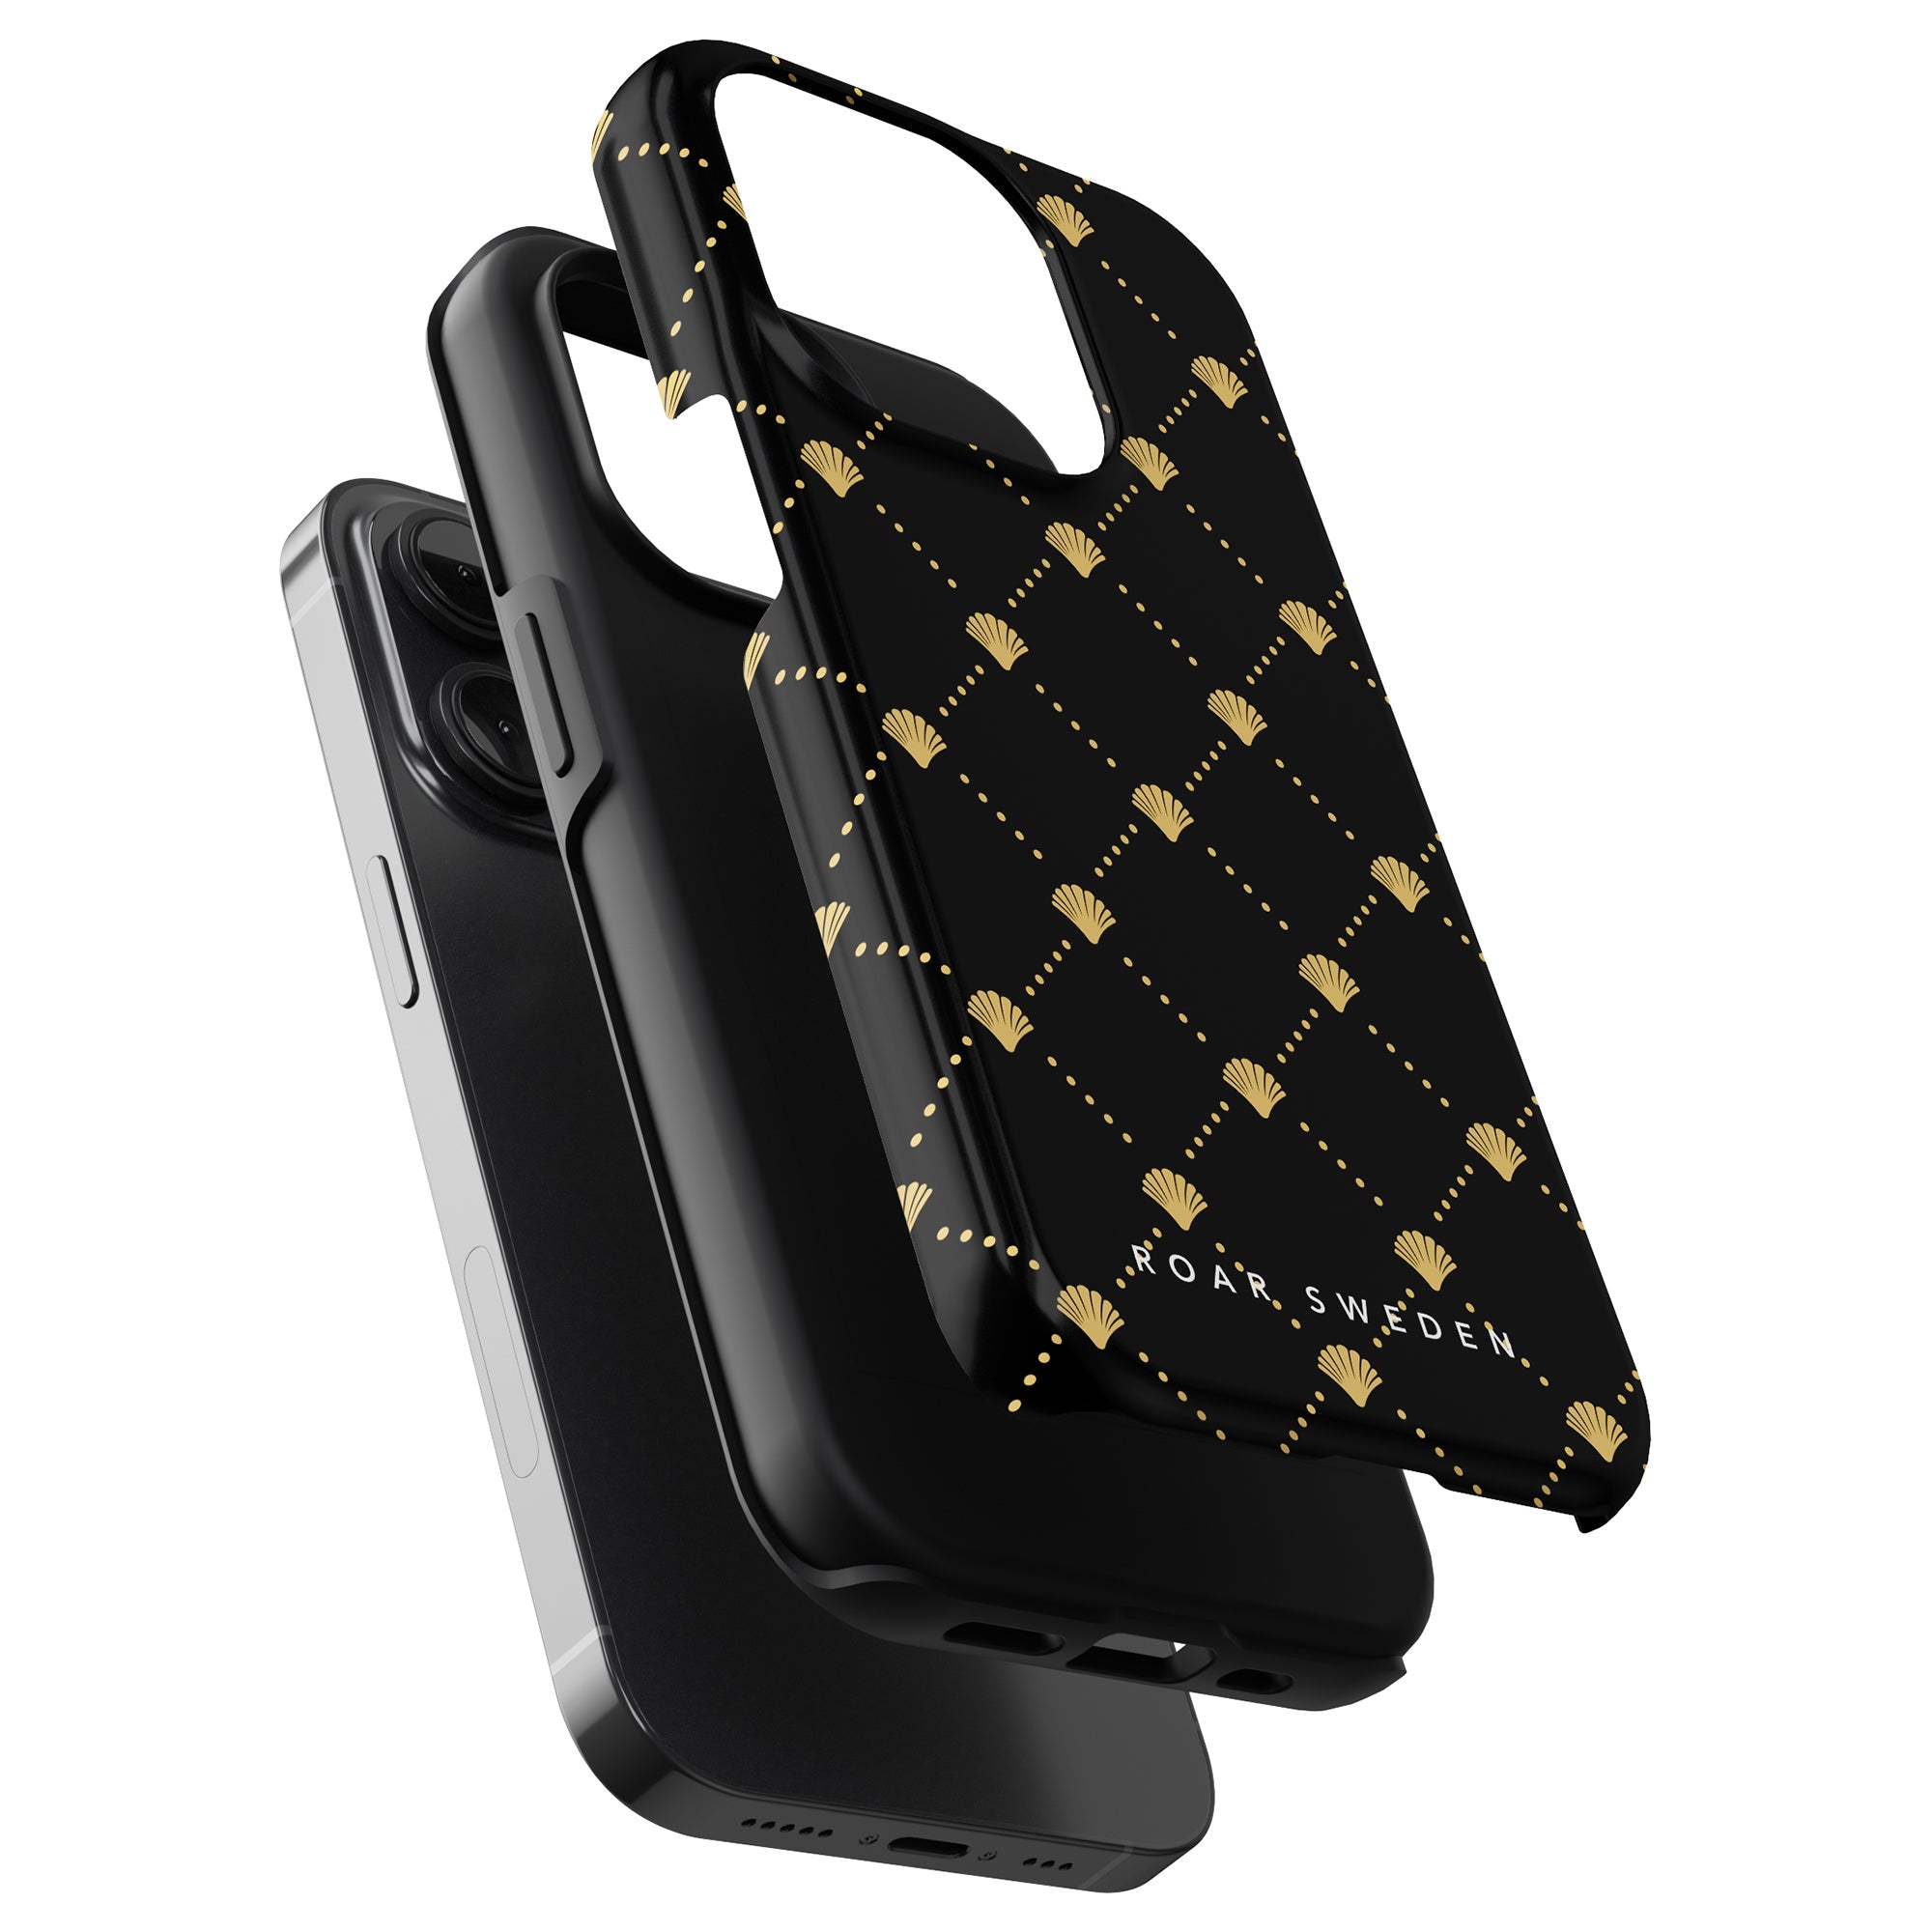 A Luxe Shells Black - Tough Case from the Ocean Collection with "MOAR SWEDEN" text, shown partially covering a black smartphone.